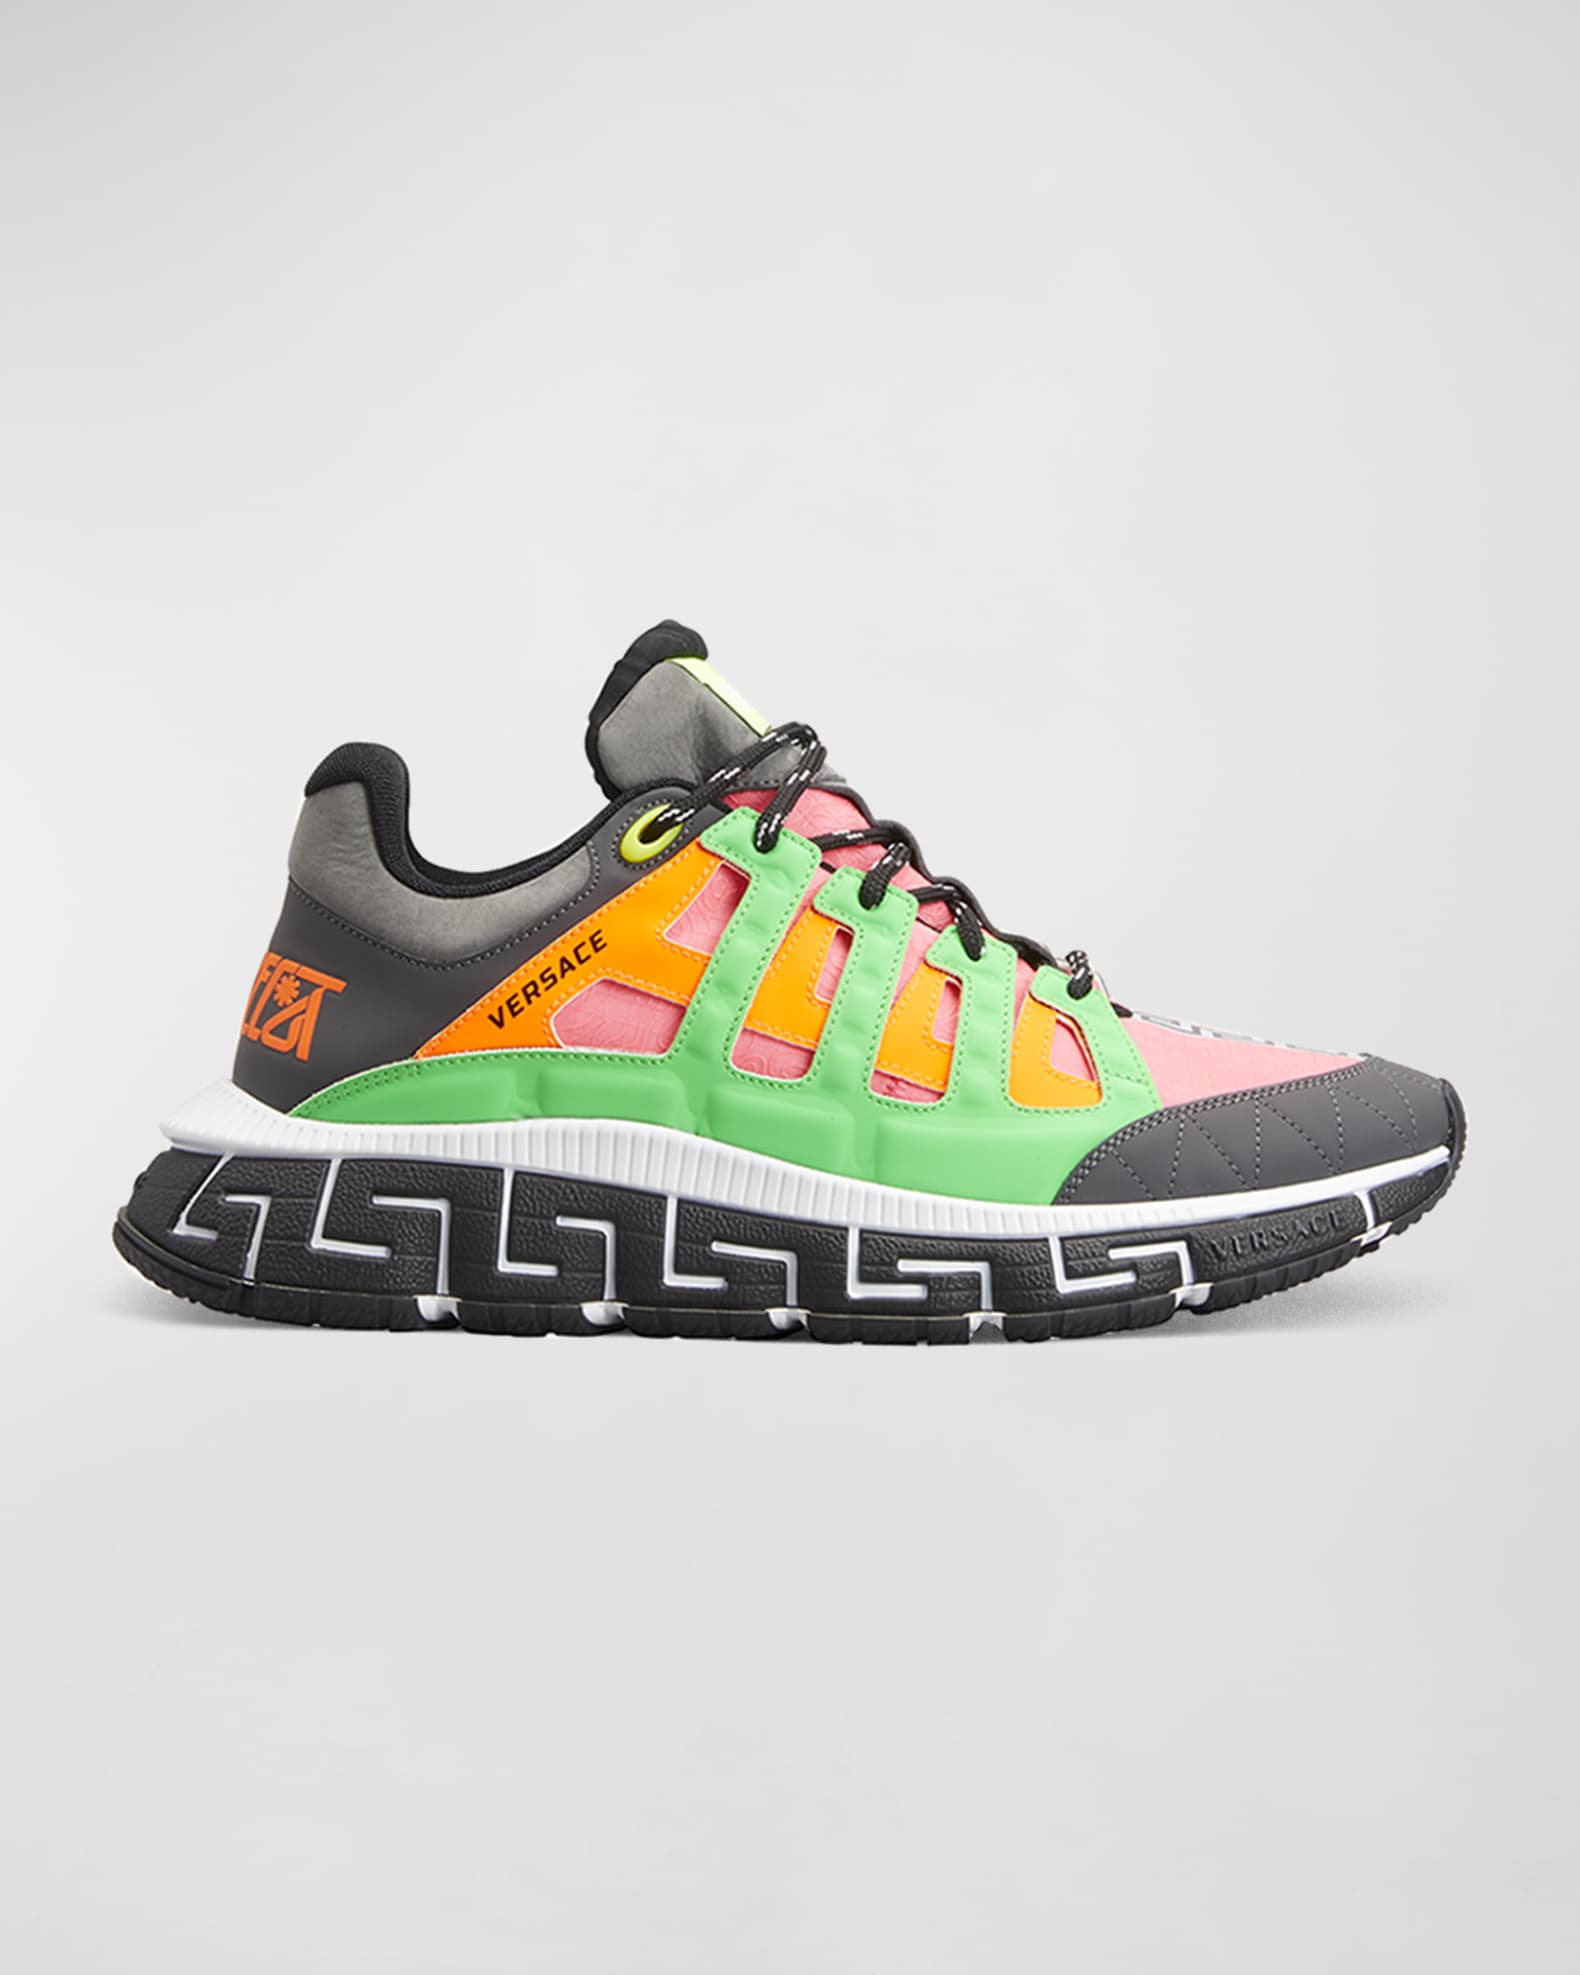 Versace MULTICOLOR CHAIN REACTION SNEAKERS  Sneakers, Sneakers fashion,  Versace sneakers